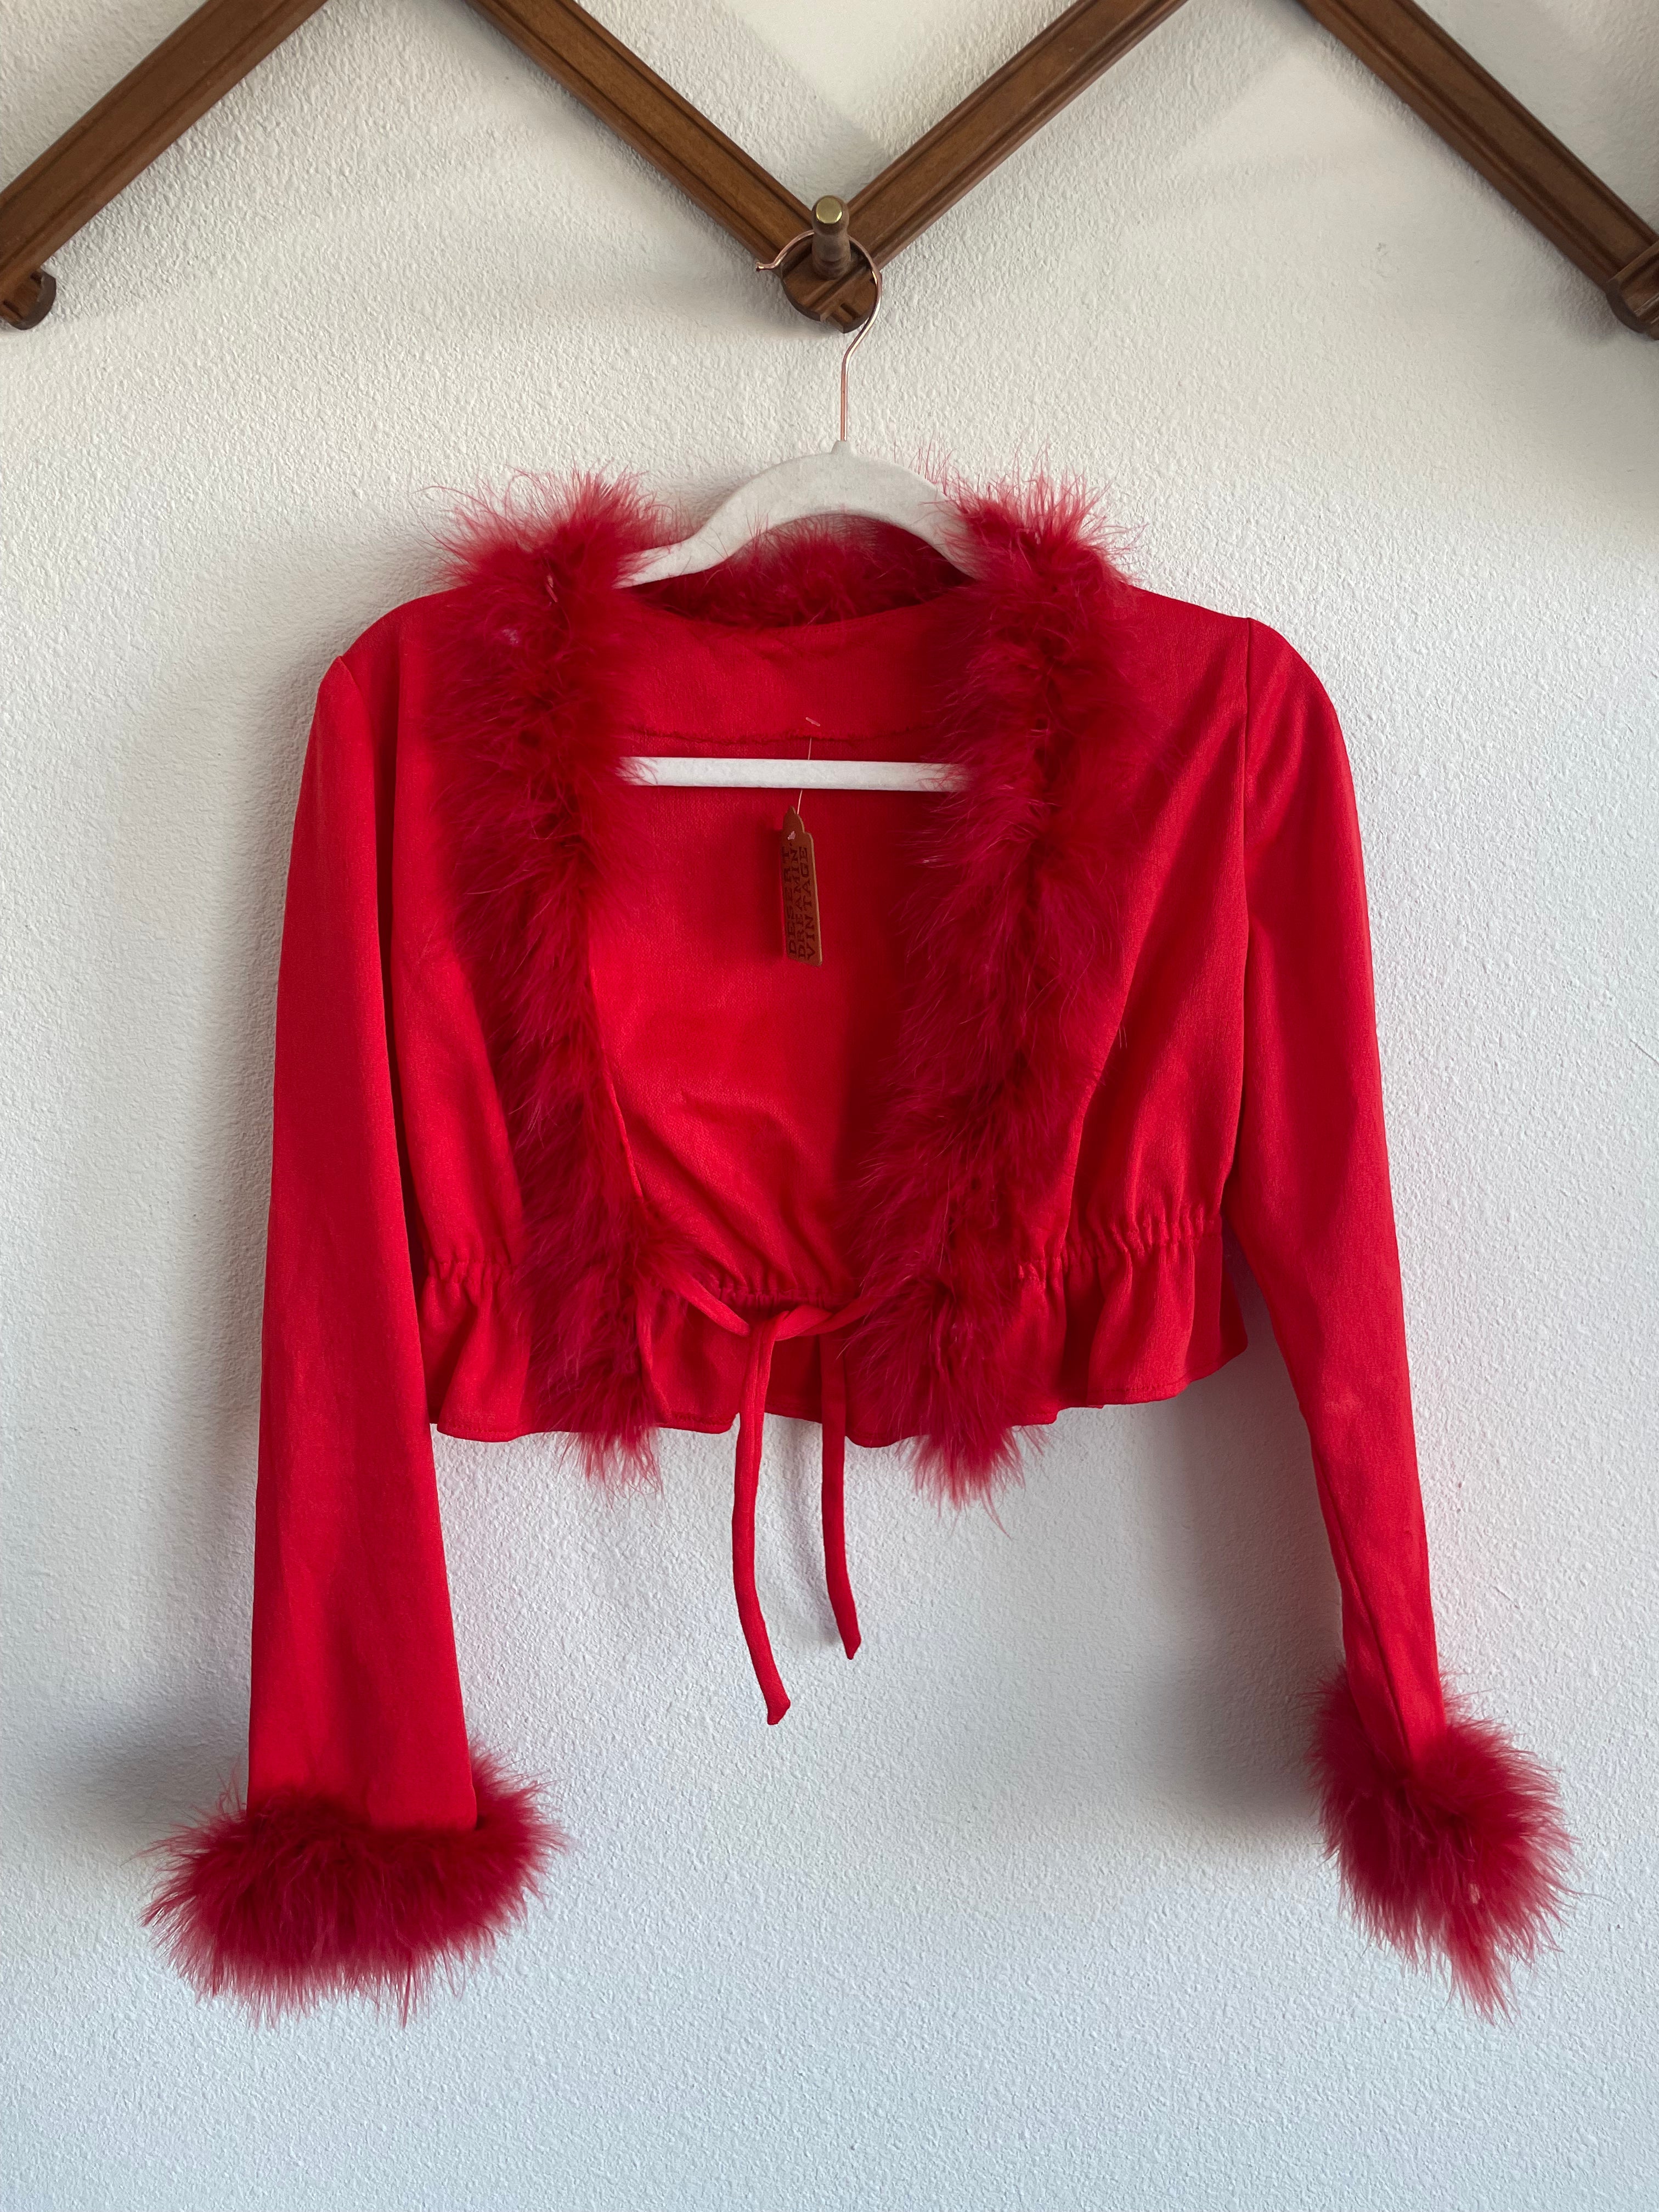 70s Maribou Lipstick Red Top